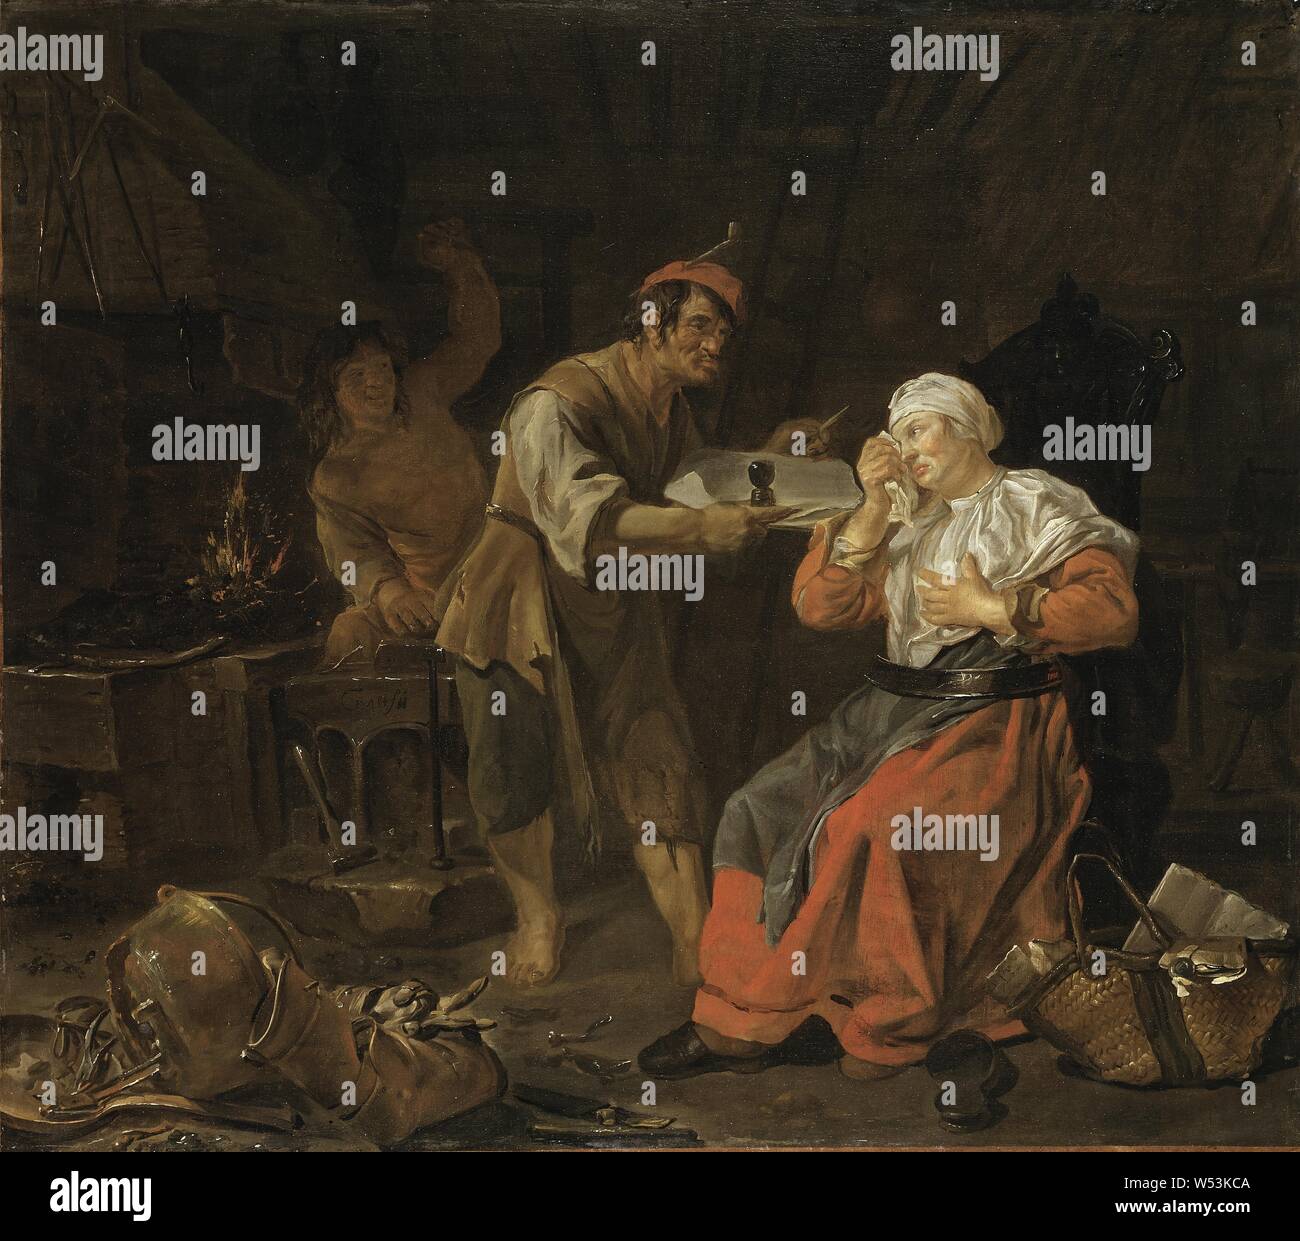 Gabriel Metsu, Old Woman in a Gossip Chair, Weeping Woman in a Blacksmith's Shop, Crying Woman in a Forge, painting, oil on canvas, Height, 105 cm (41.3 inches), Width, 120 cm (47.2 inches, Signed, G. METSU Stock Photo